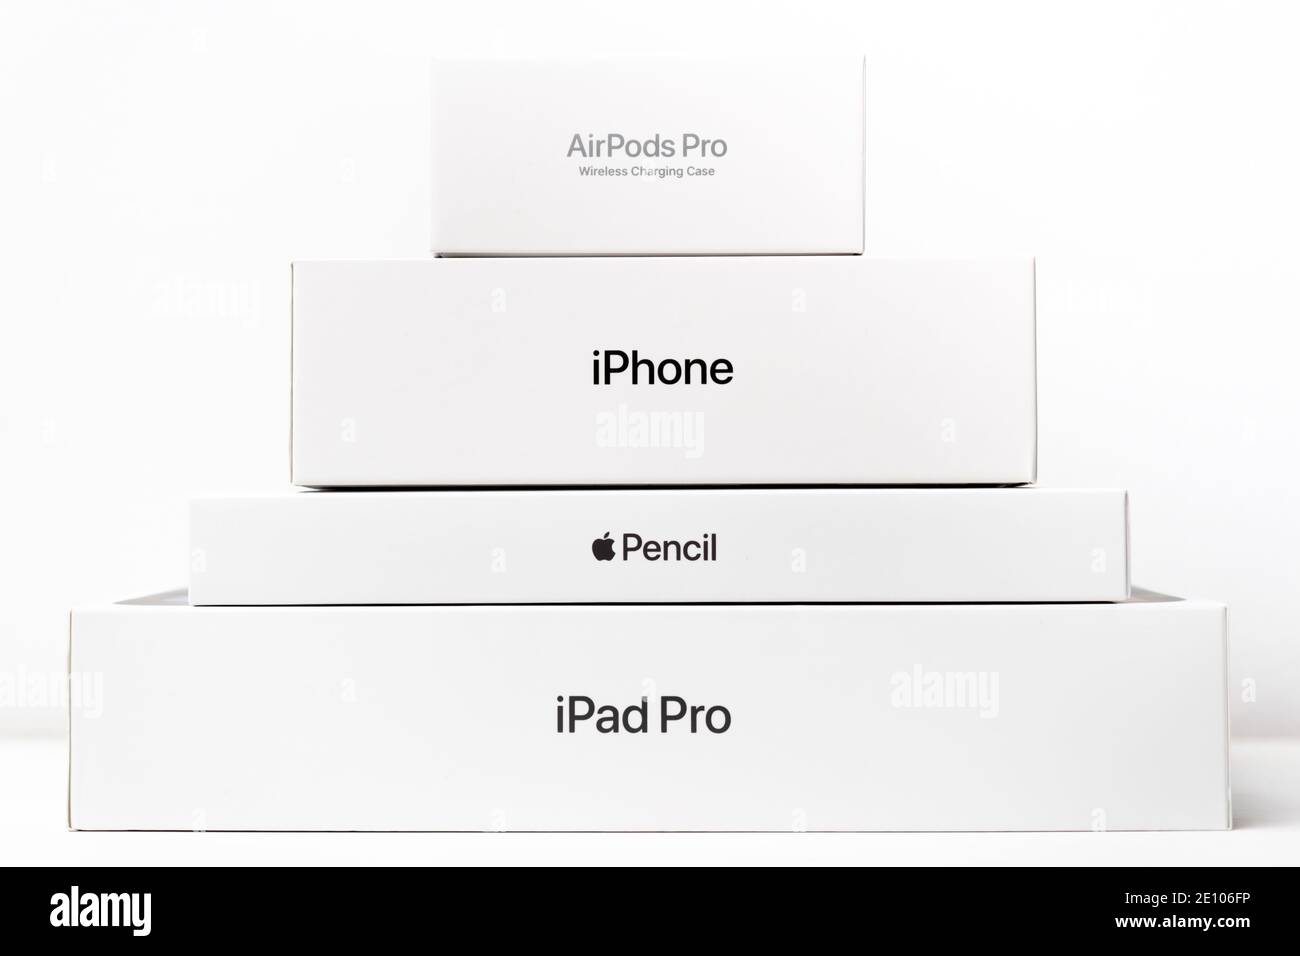 AirPods Pro, iPhone, Apple pencil, iPad Pro boxes isolated on the white  background, December 2020, San Francisco, USA Stock Photo - Alamy